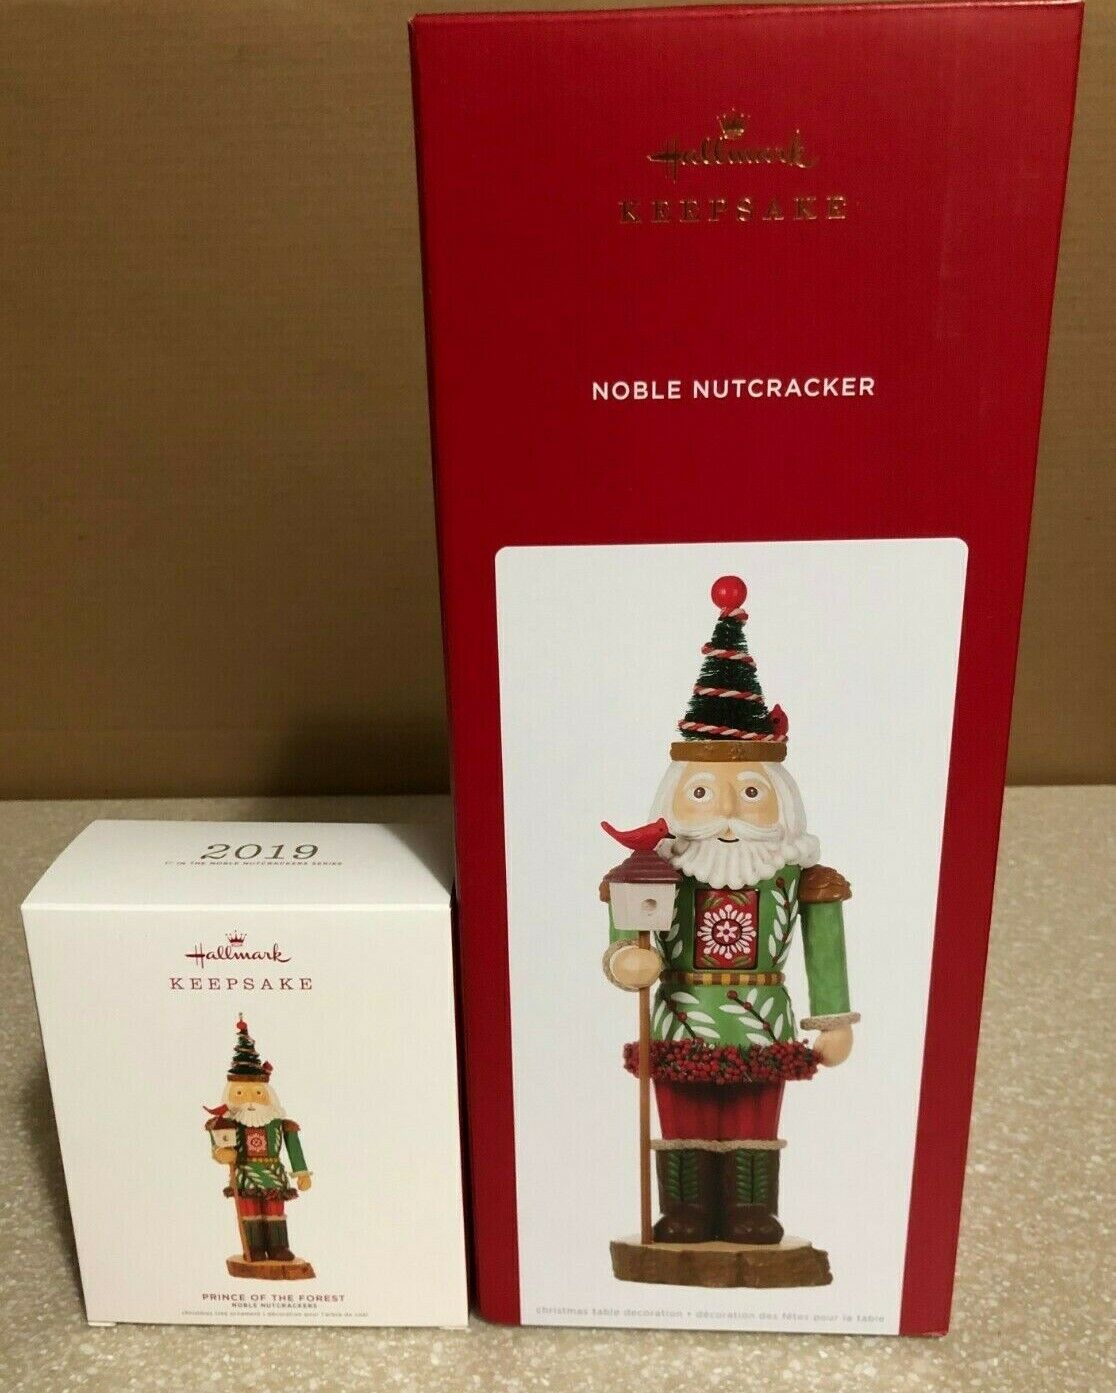 HALLMARK NOBLE NUTCRACKER PRINCE OF THE FOREST 2019 & TABLE TOP DECORATION 2021